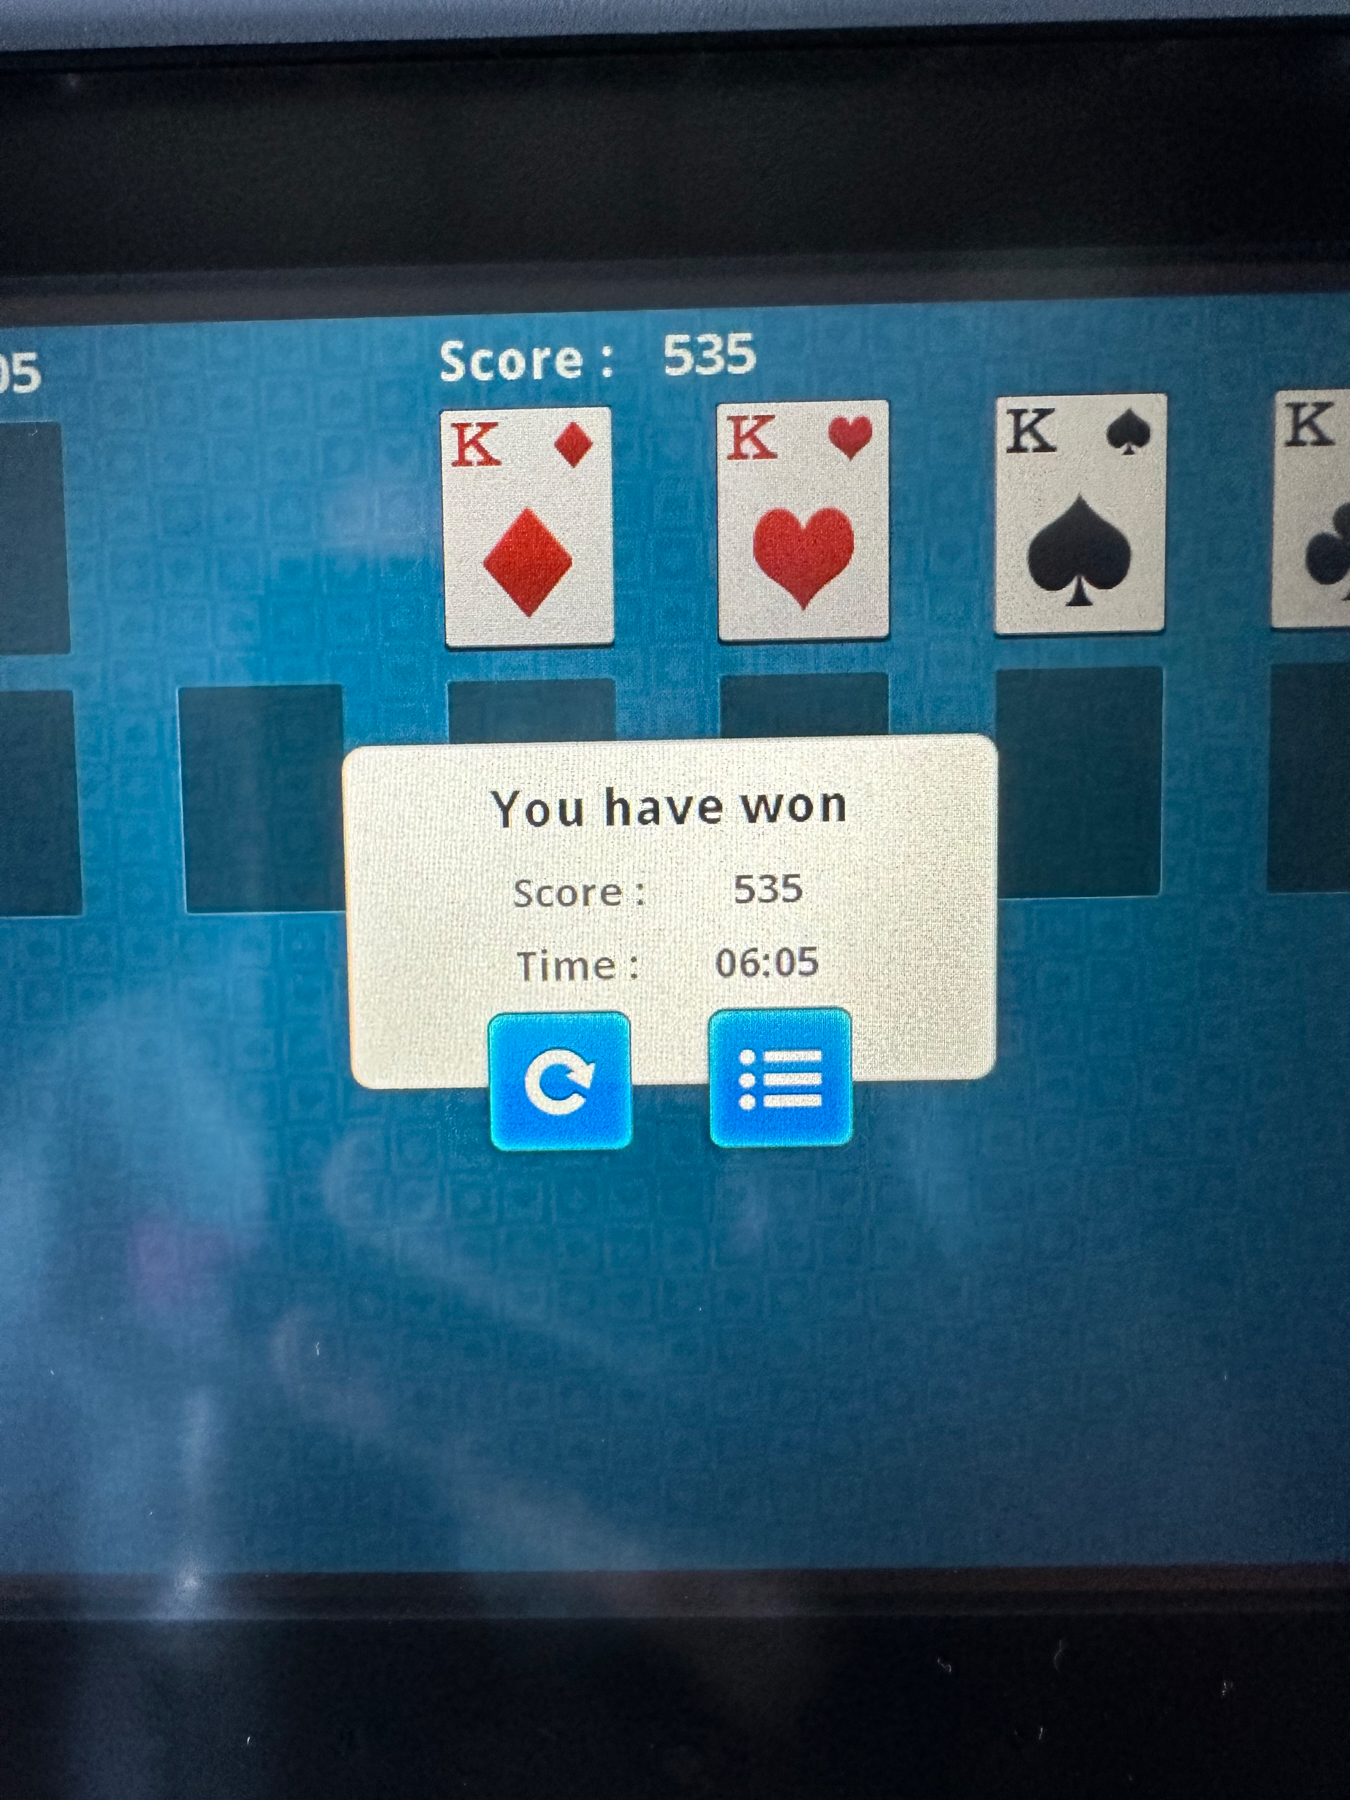 A computer screen displaying a completed game of Solitaire, with a pop-up window stating “You have won” and showing a score of 535 and a time of 6:05. The four King cards are visible at the top of the game